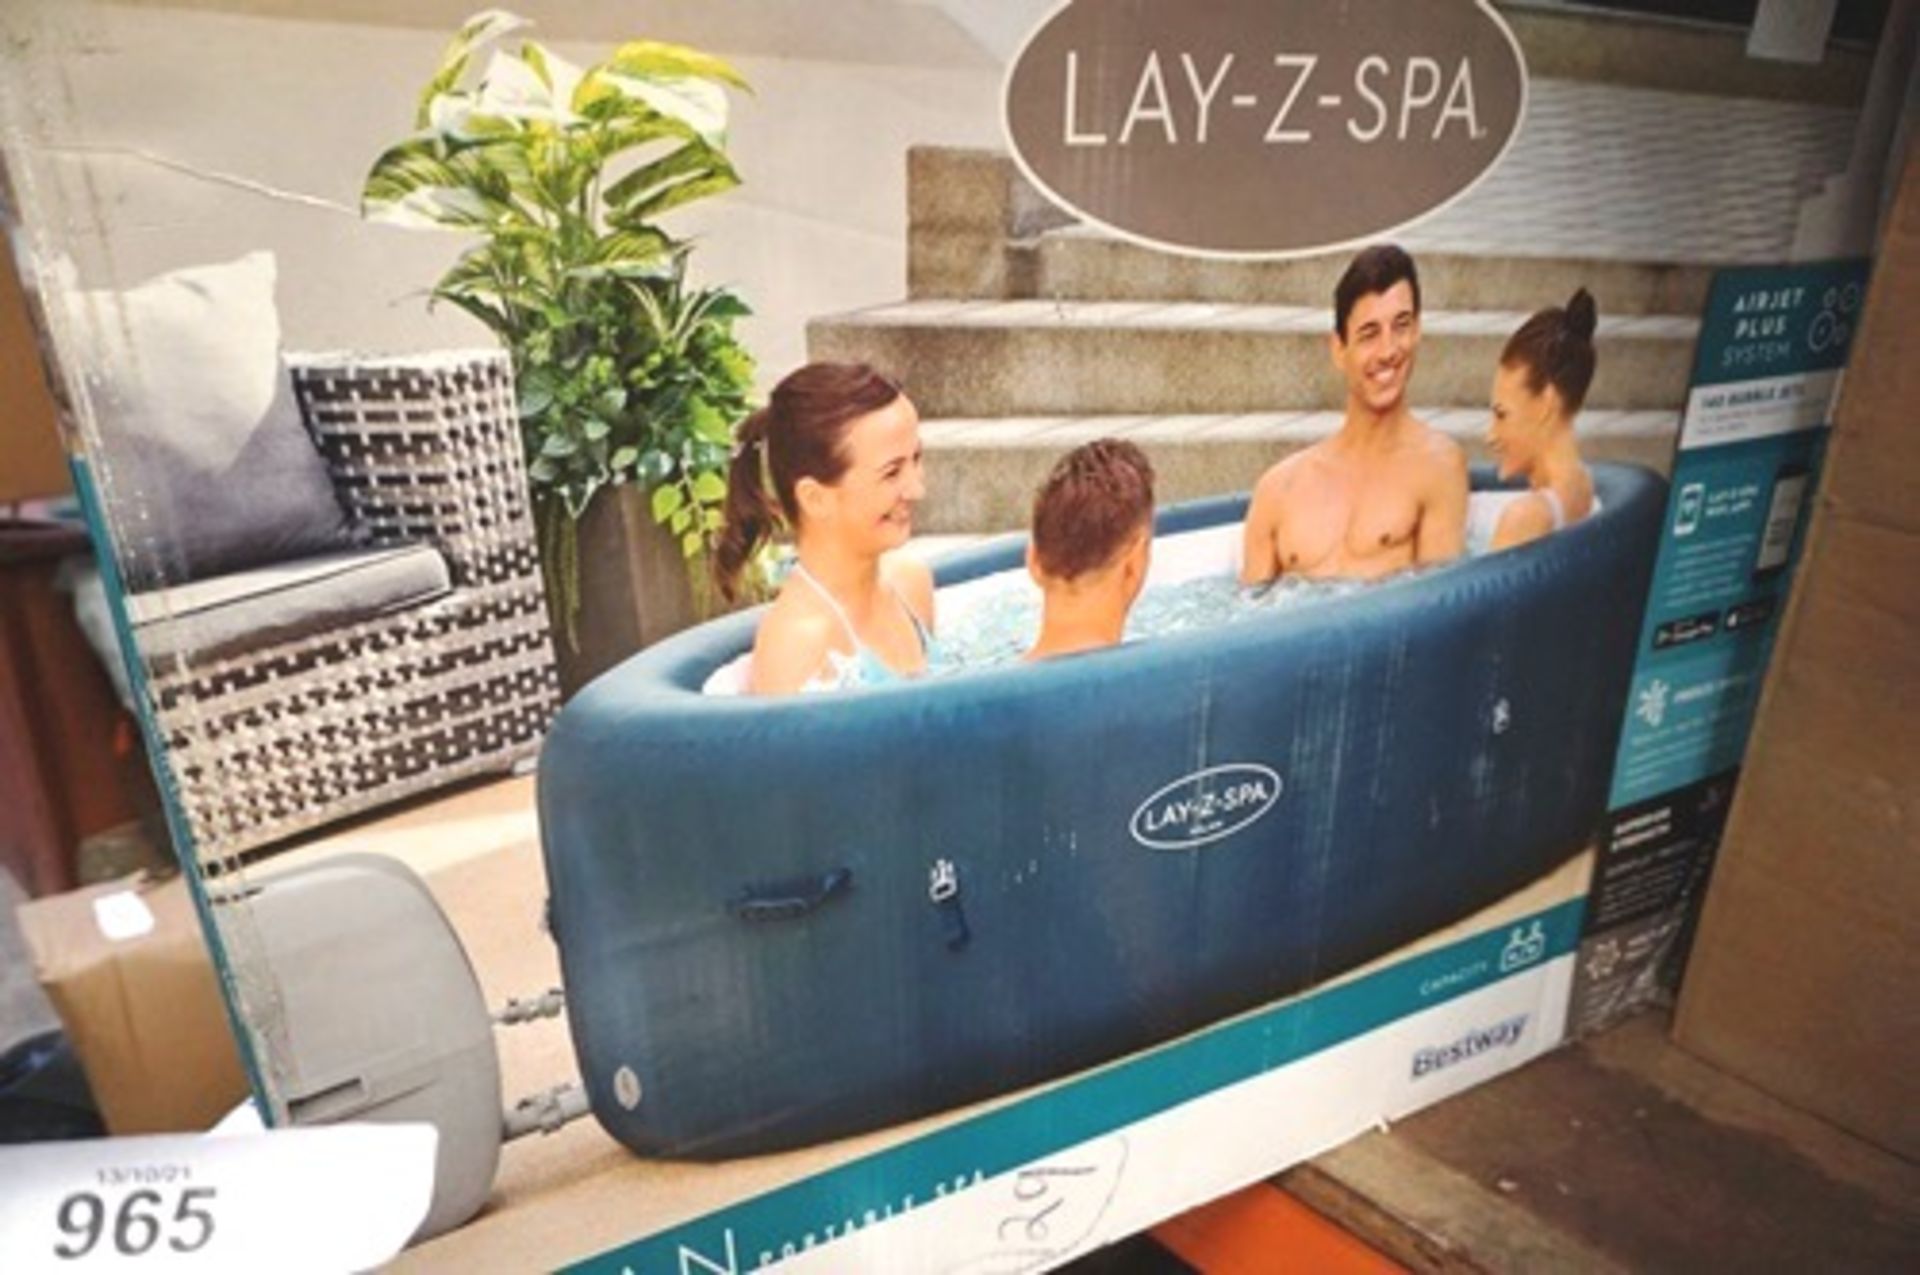 1 x Milan portable Lay-Z-Spa, model 60029, 916ltrs, 4-6 people, 2050W - Sealed new in box (GS15)